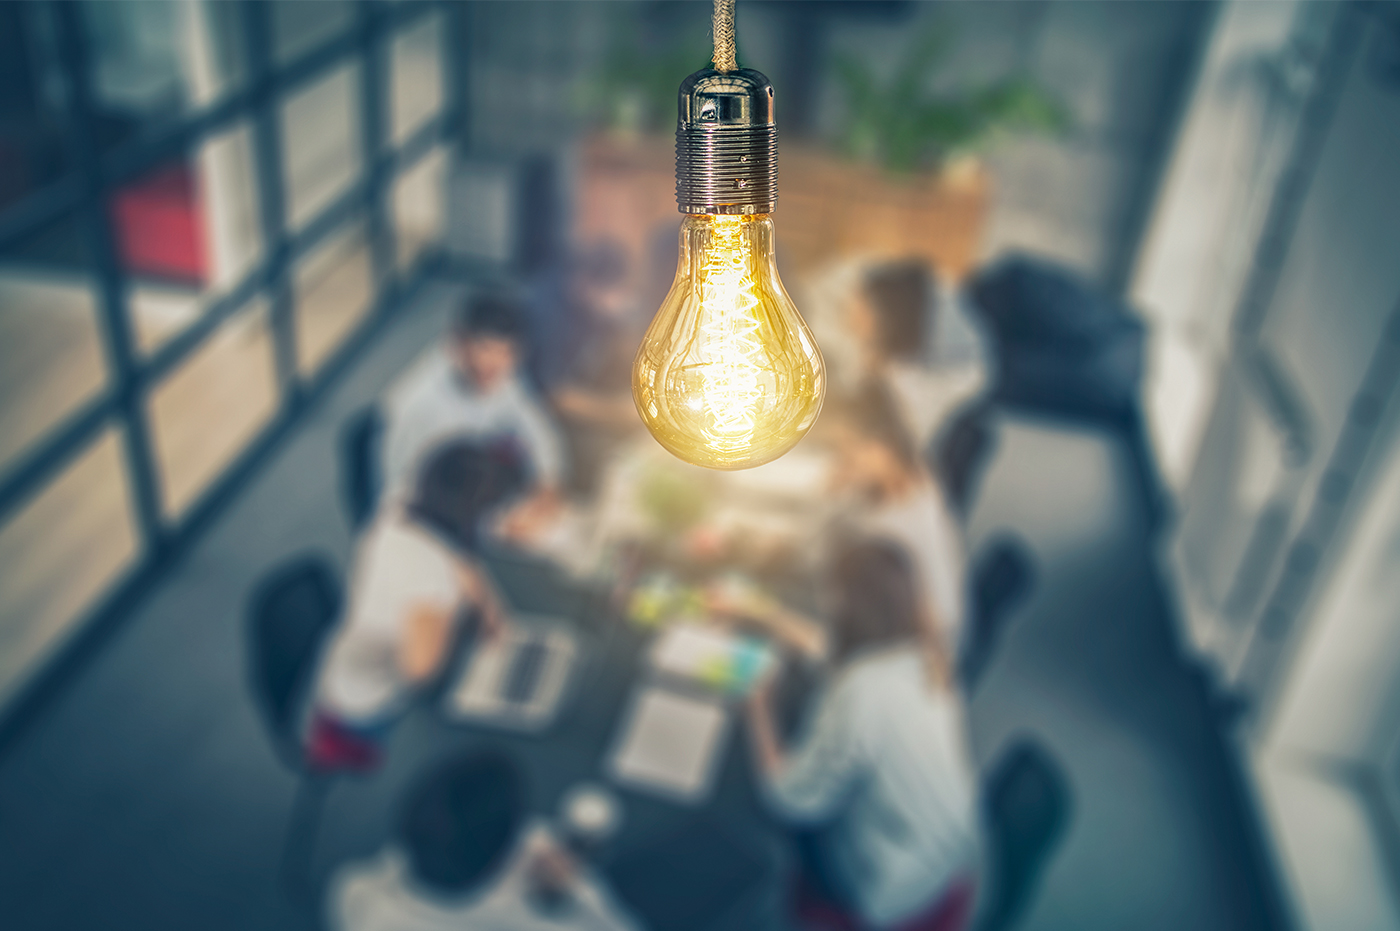 Illuminated lightbulb hanging over a conference table full of people talking.